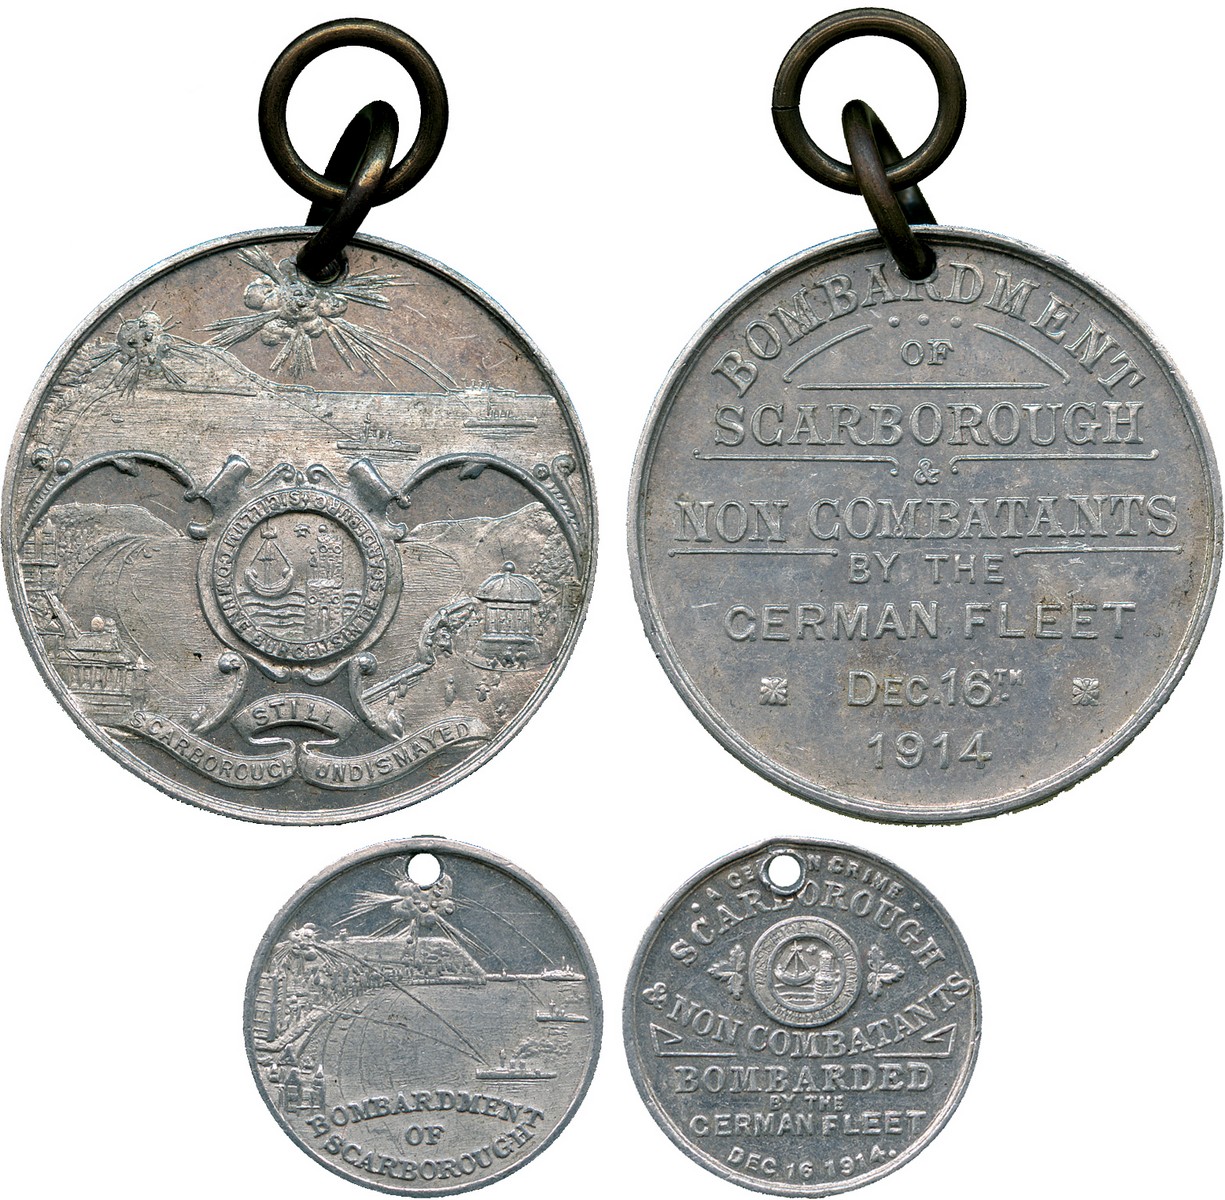 COMMEMORATIVE MEDALS, WORLD MEDALS, Medals of the First World War, Medals of the Allies, Great